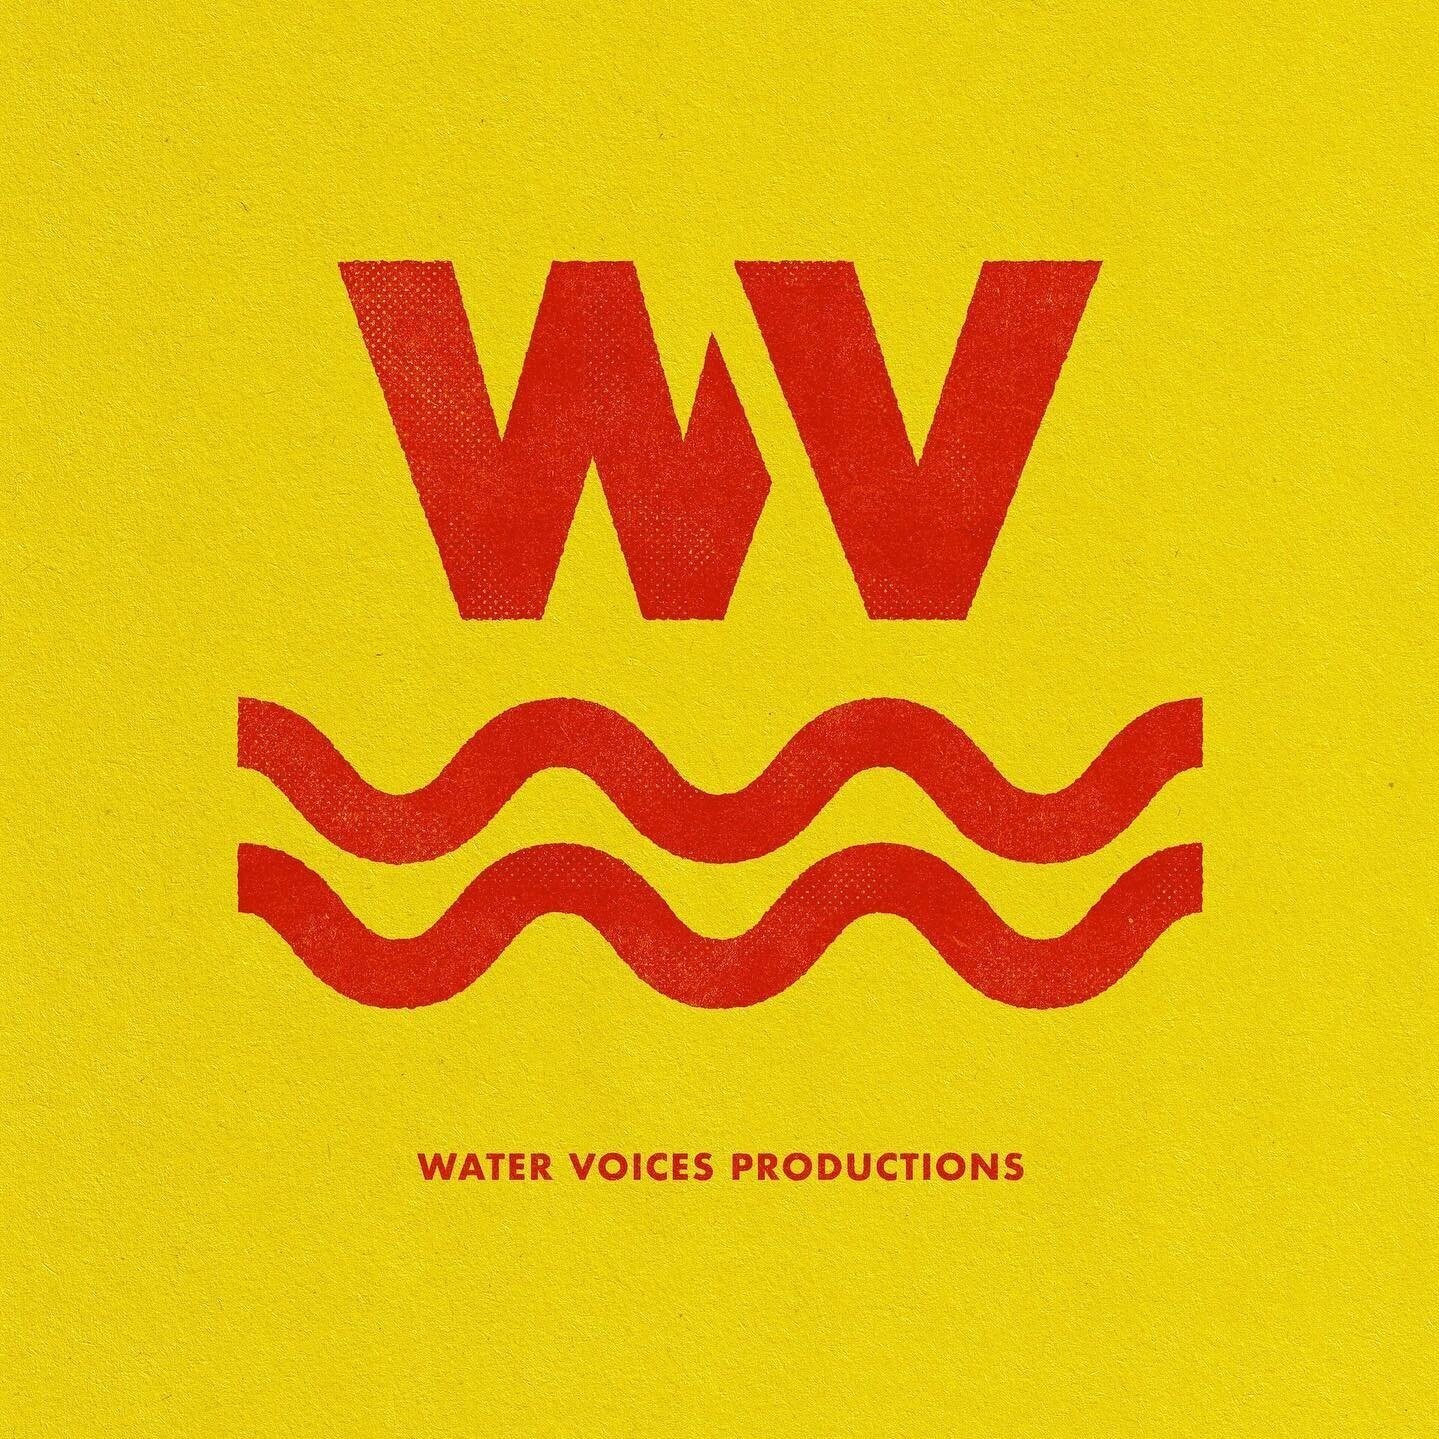 Water Voices Productions